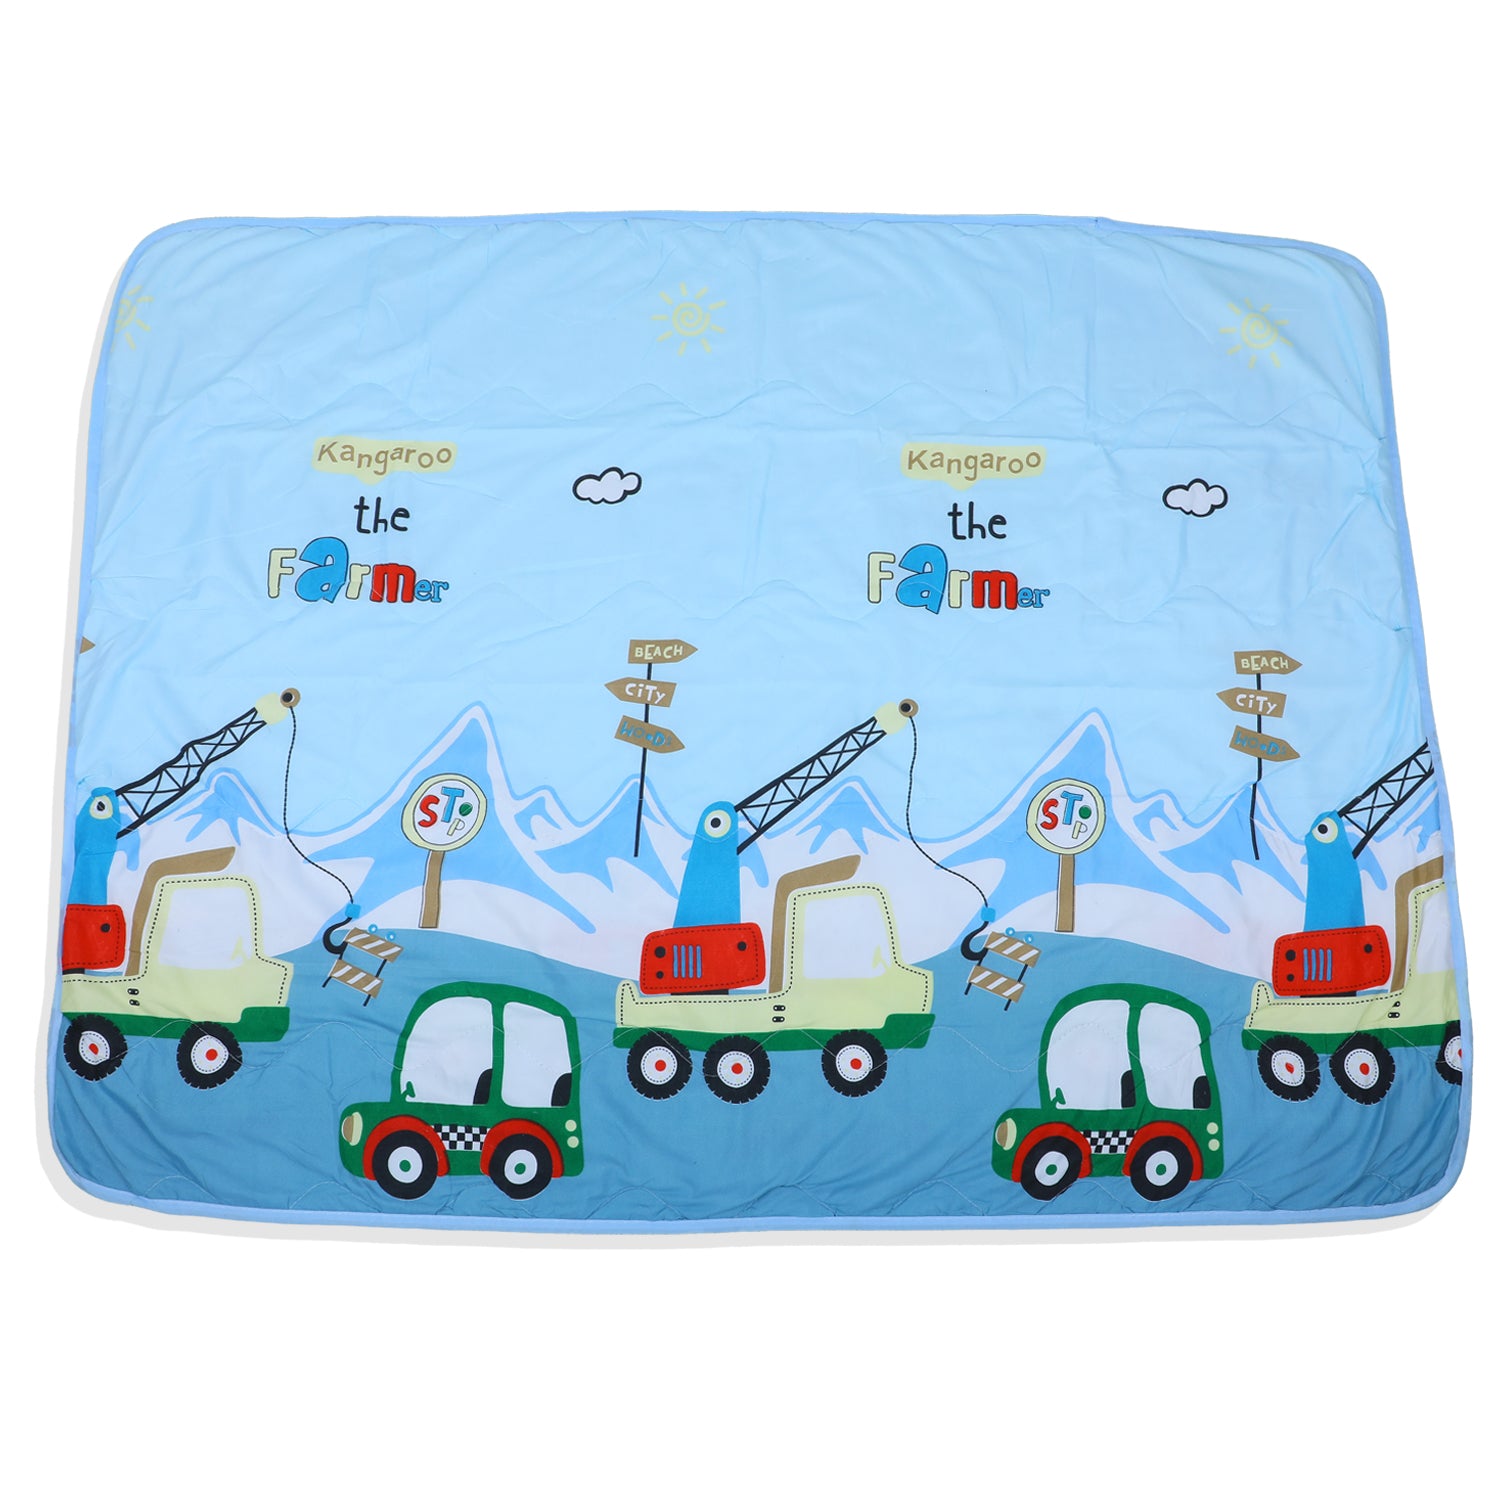 Baby Moo Farm Construction Soft Quilted Premium Reversible Blanket - Blue